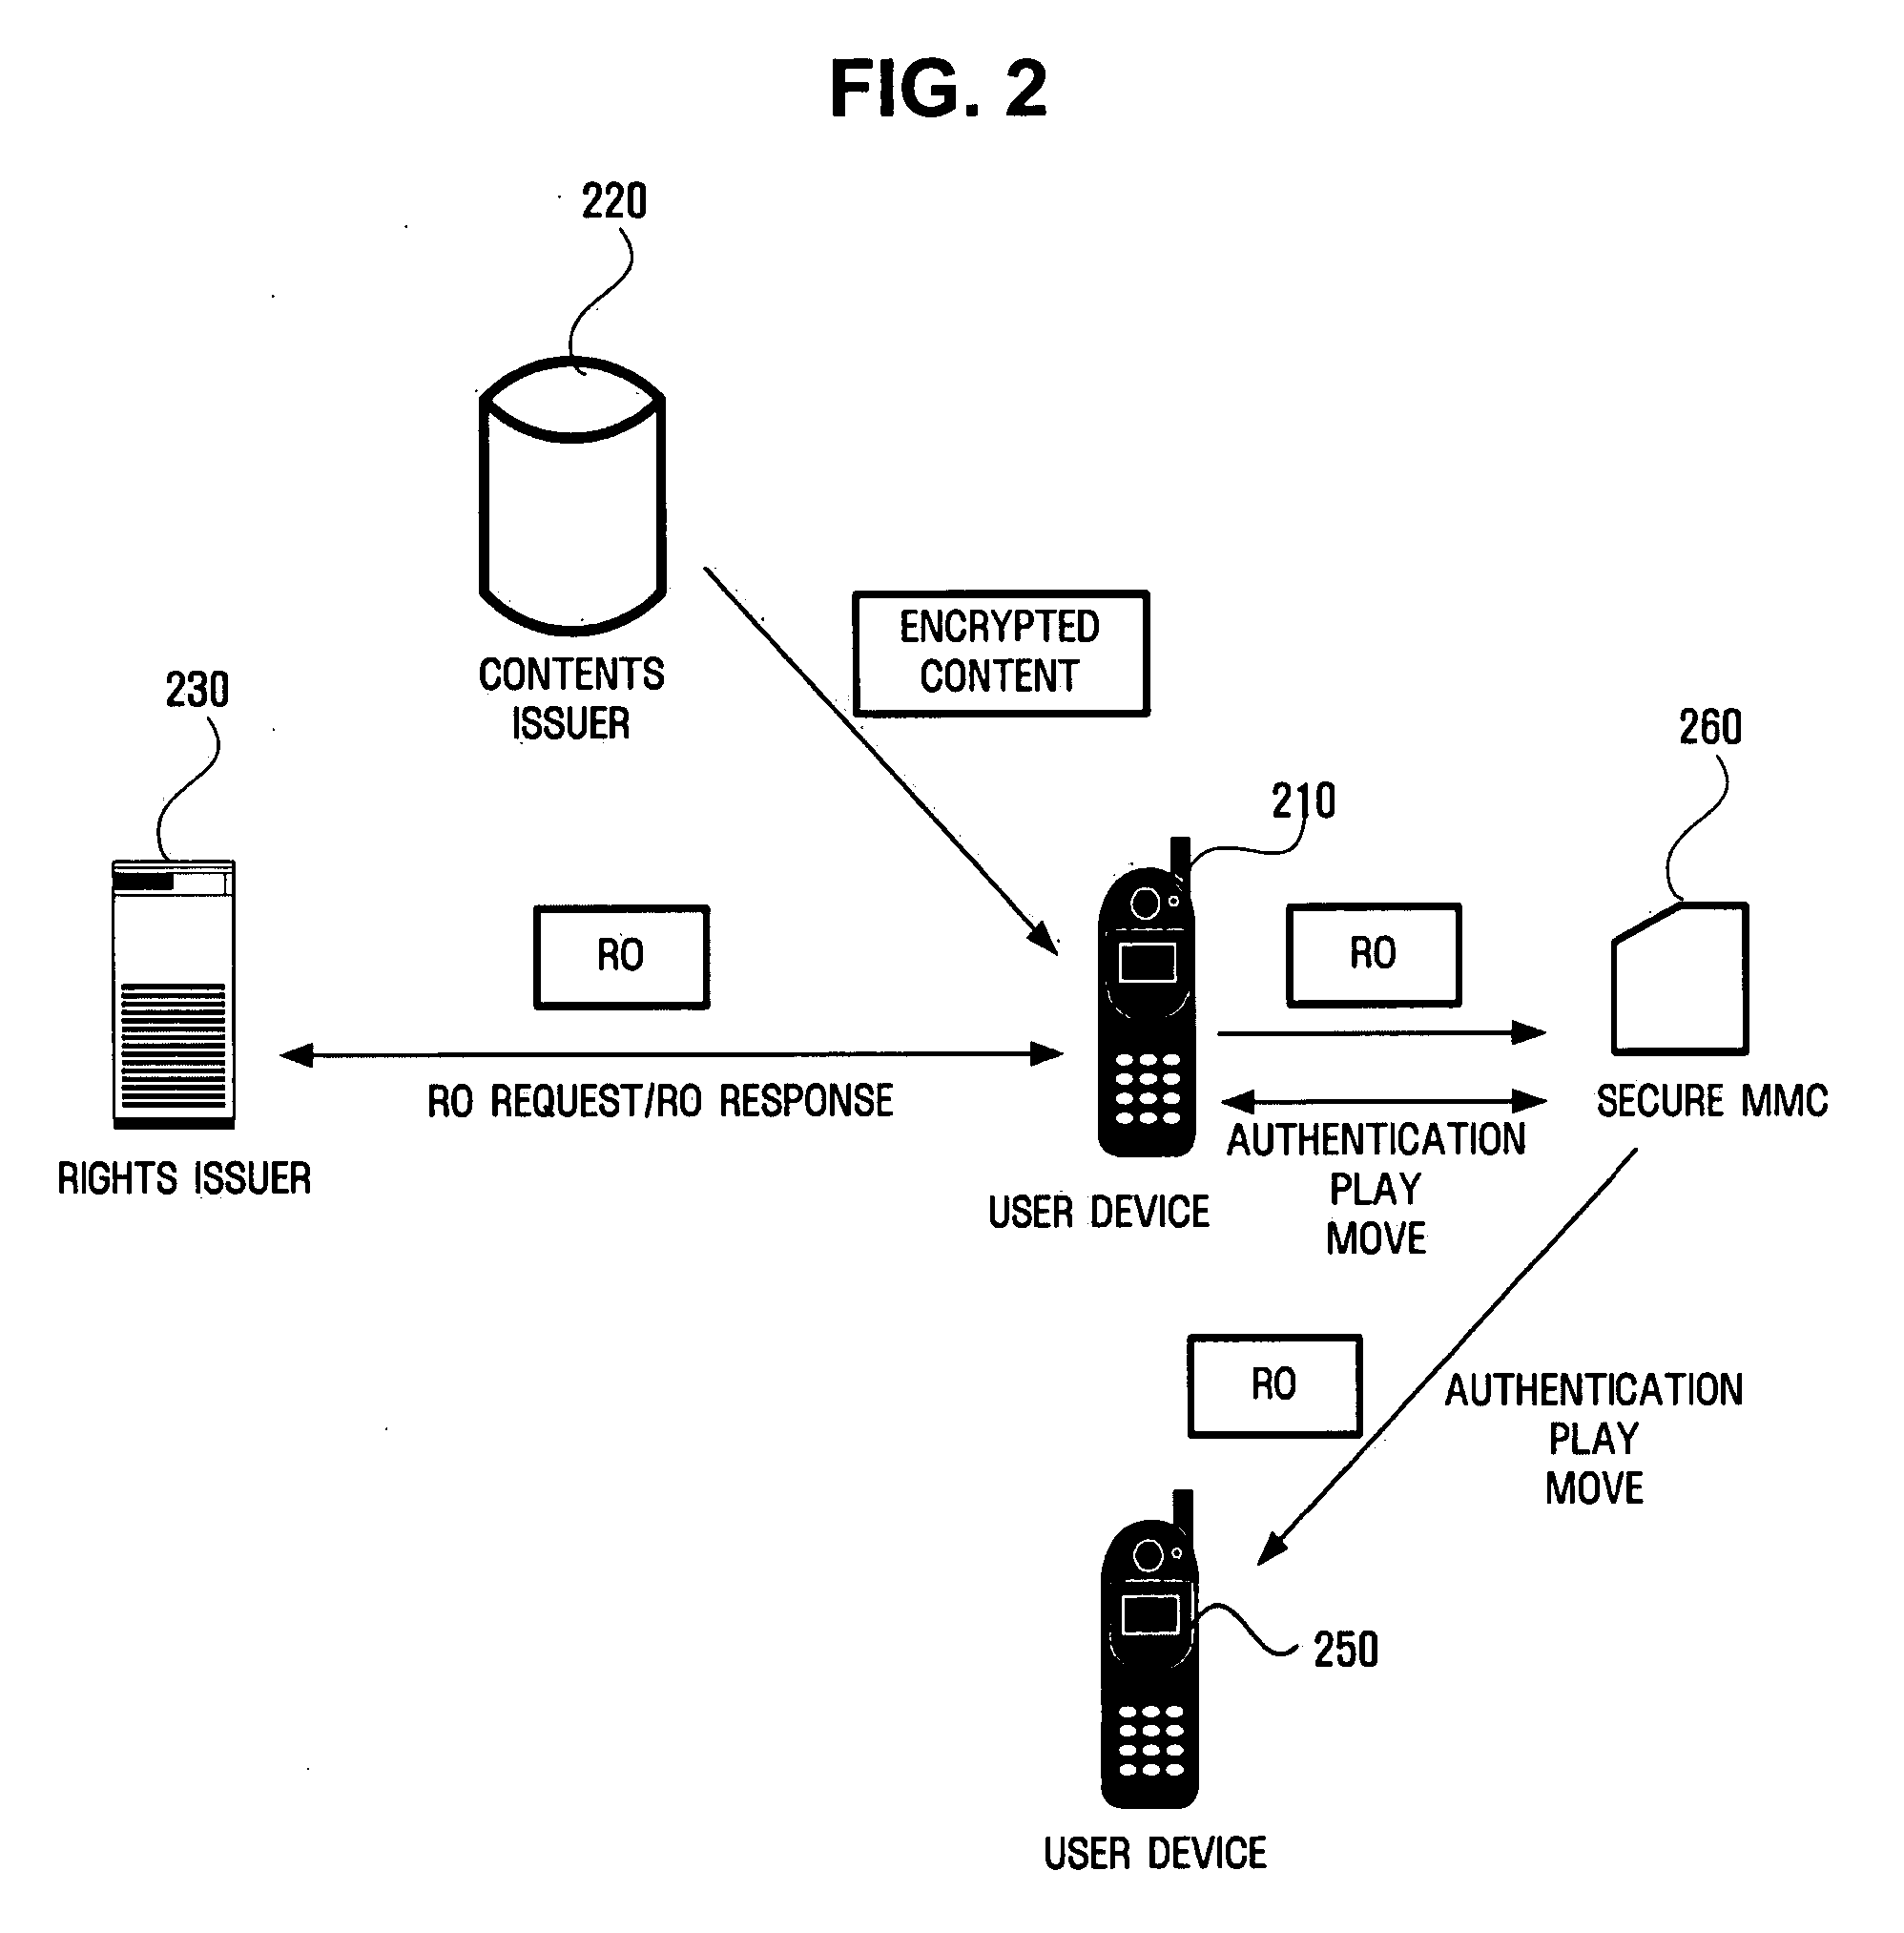 Apparatus and method for sending and receiving digital rights objects in converted format between device and portable storage